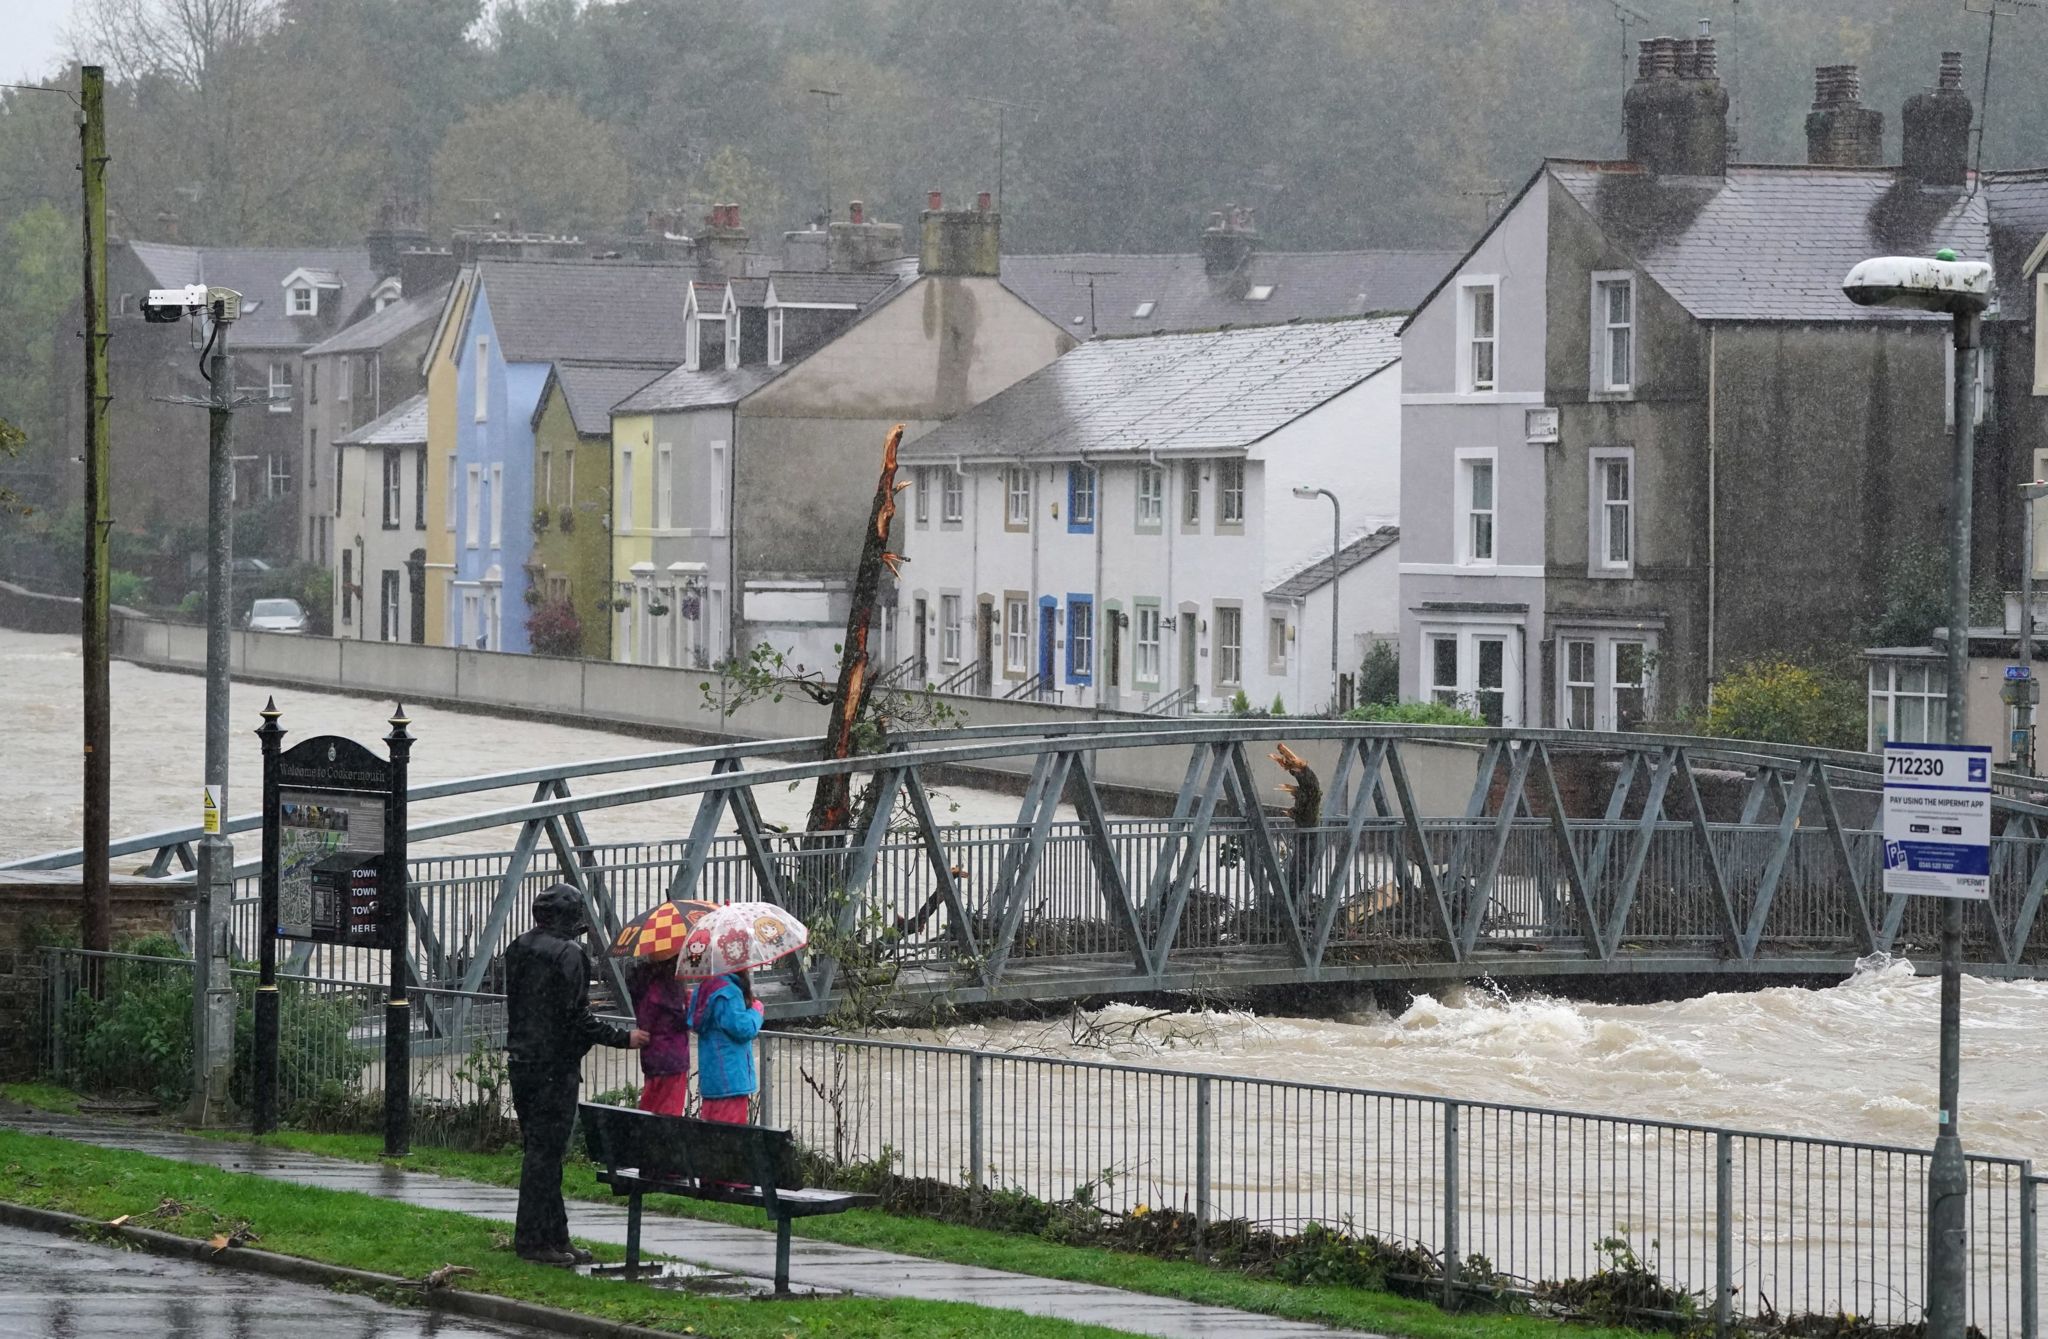 The river was level with the pedestrian bridge in Cockermouth